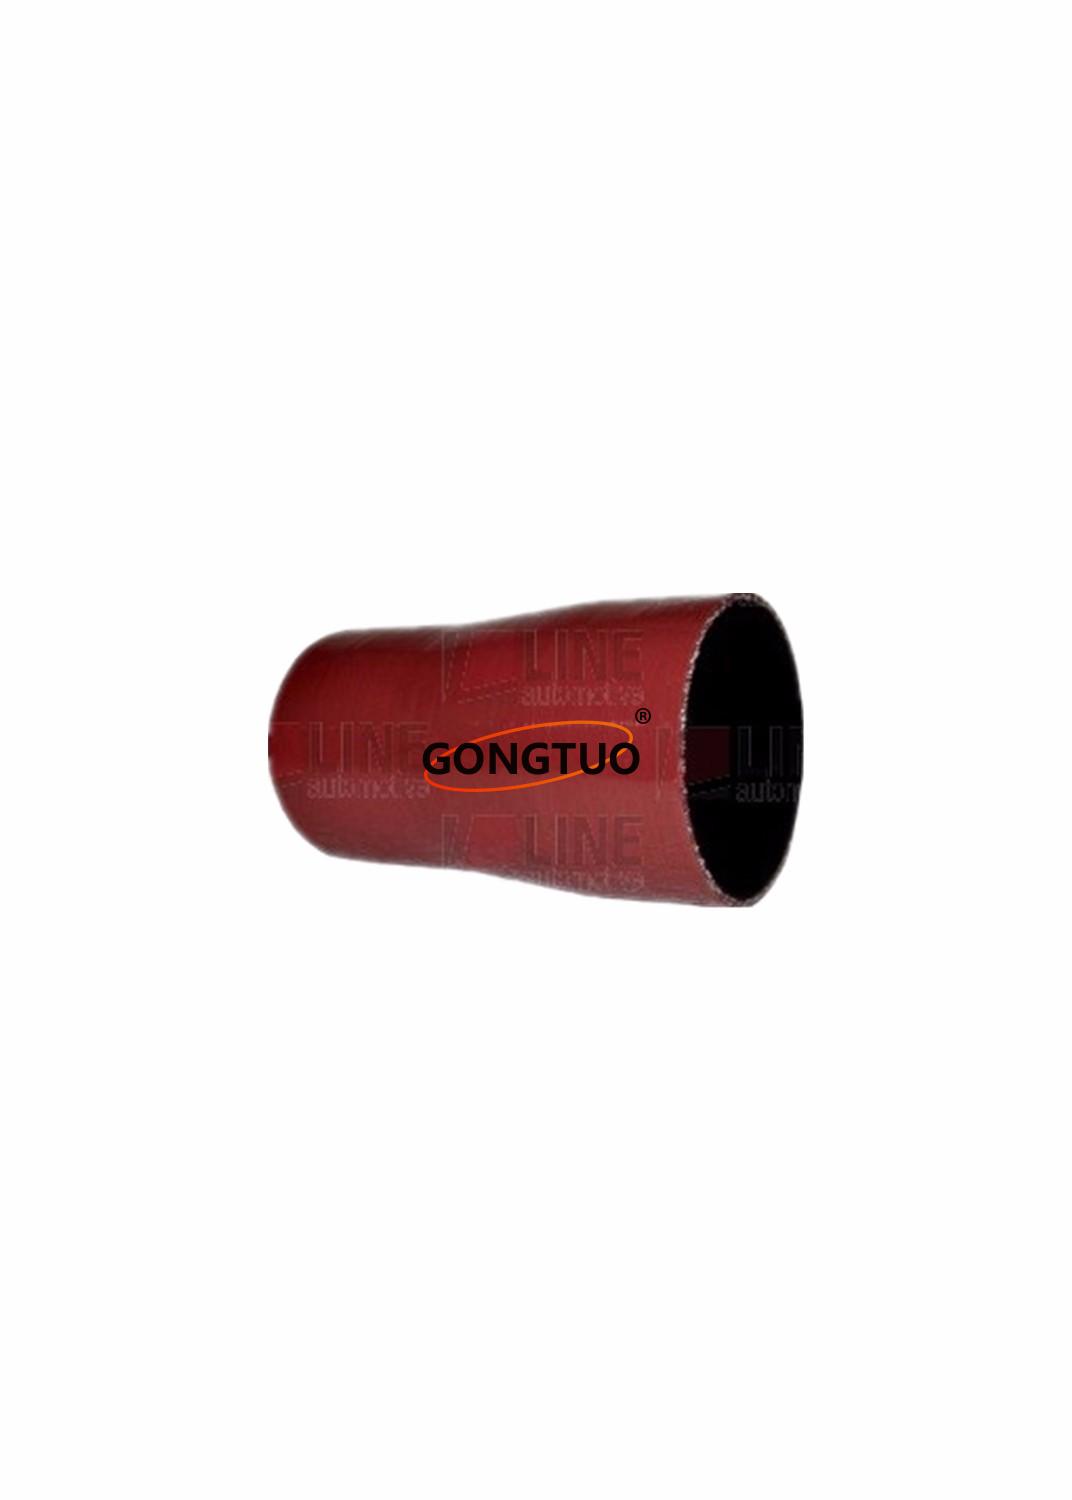 TRUCK SILICONE GG HOSE OEM:1633705 1744071 1676184 1744070